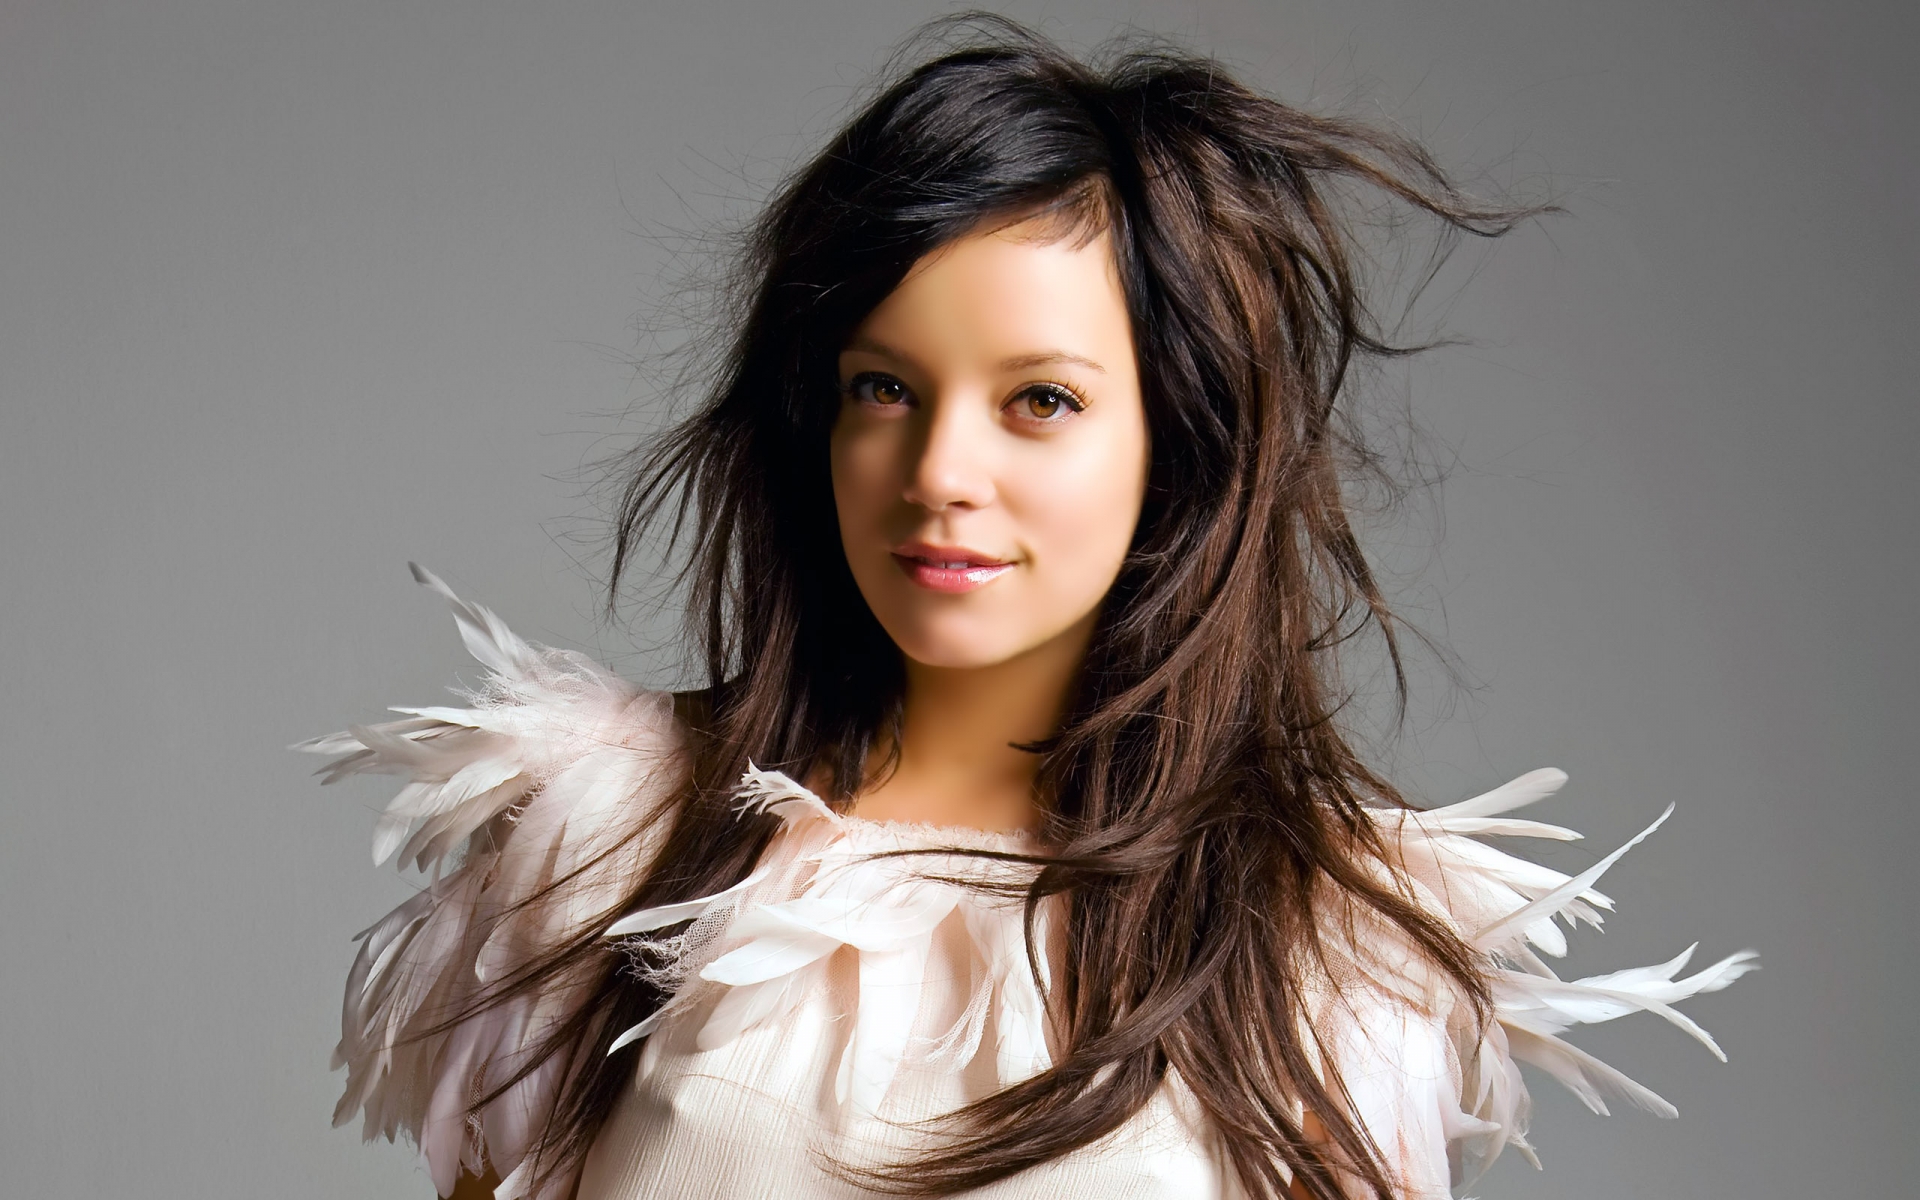 Superb Lily Allen for 1920 x 1200 widescreen resolution